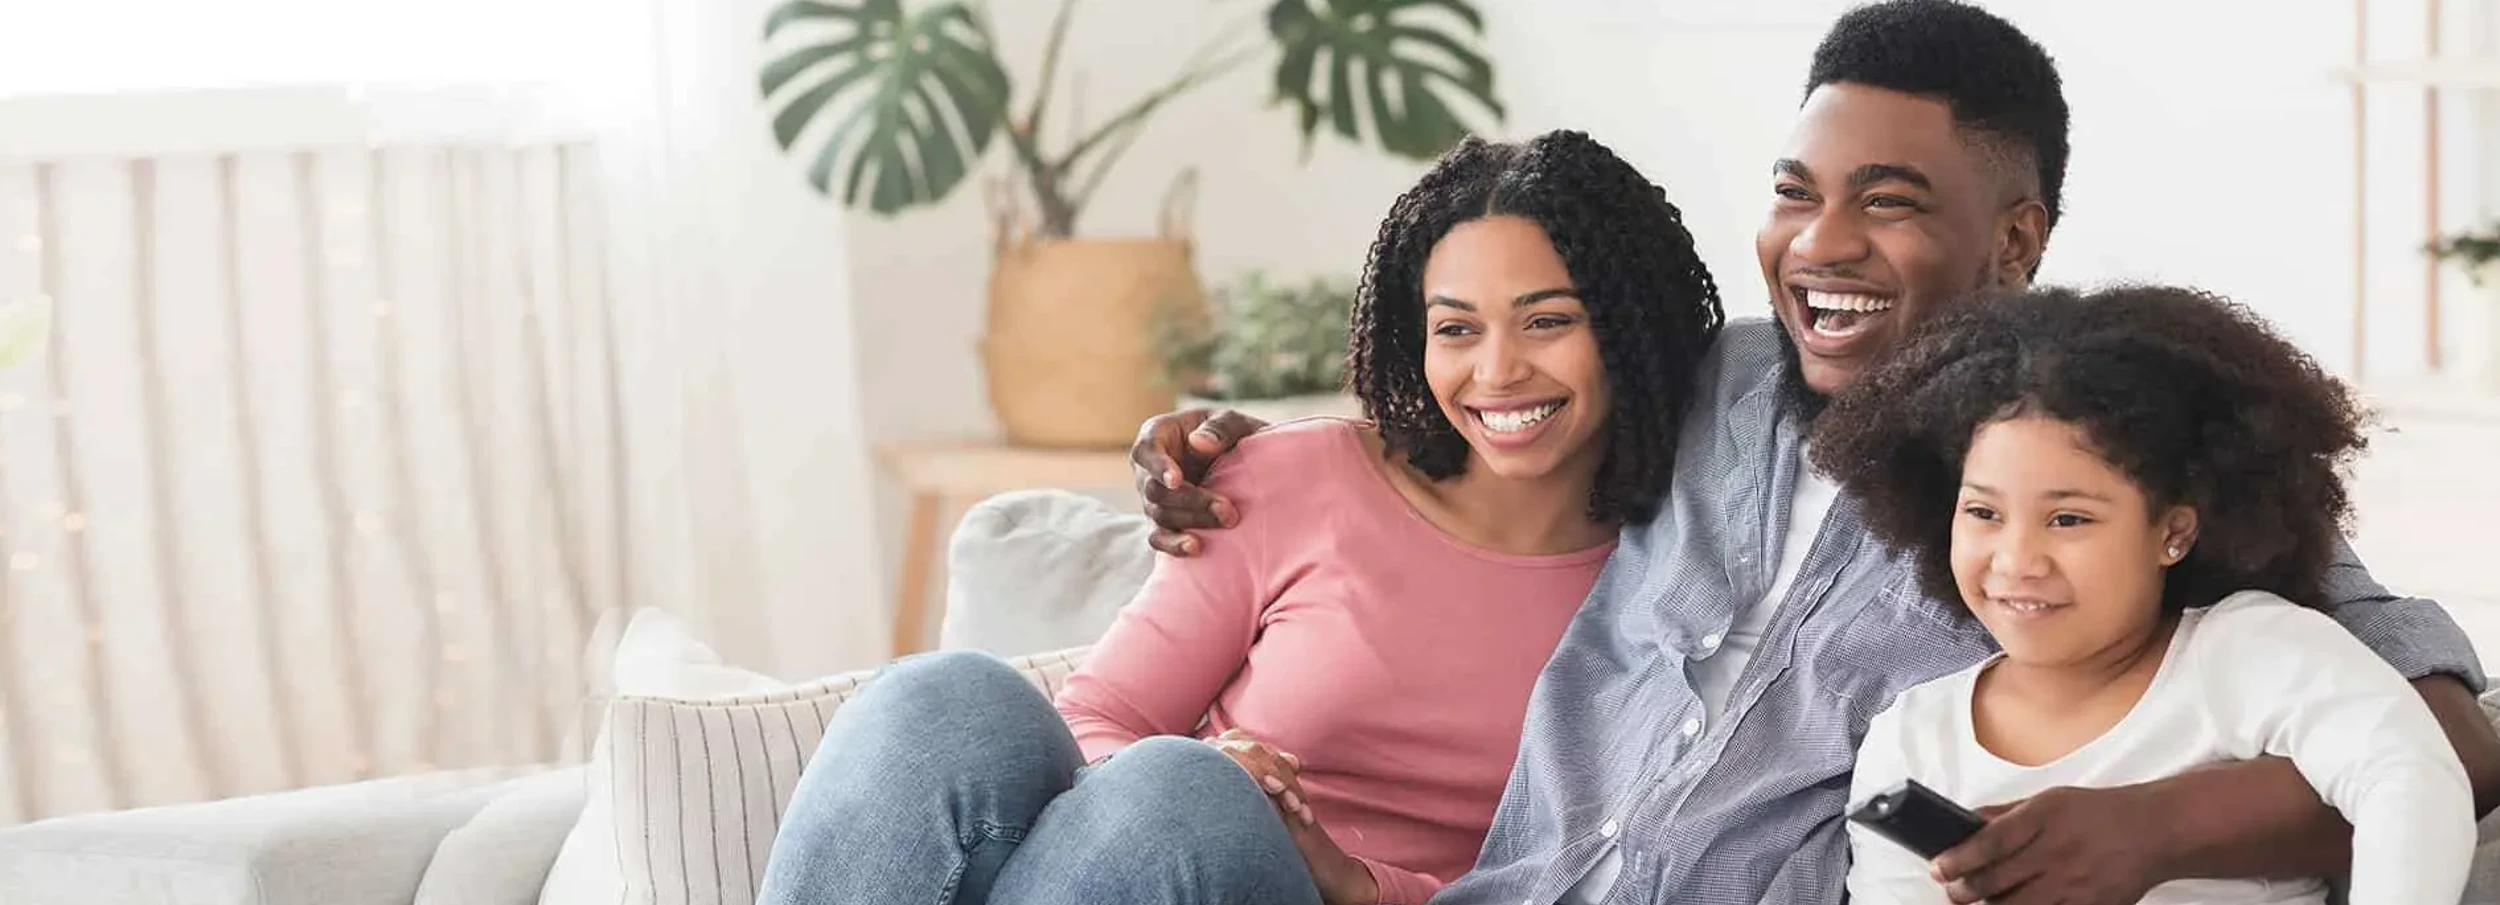 Young African American couple and daughter sitting on couch and smiling in brightly lit interior.